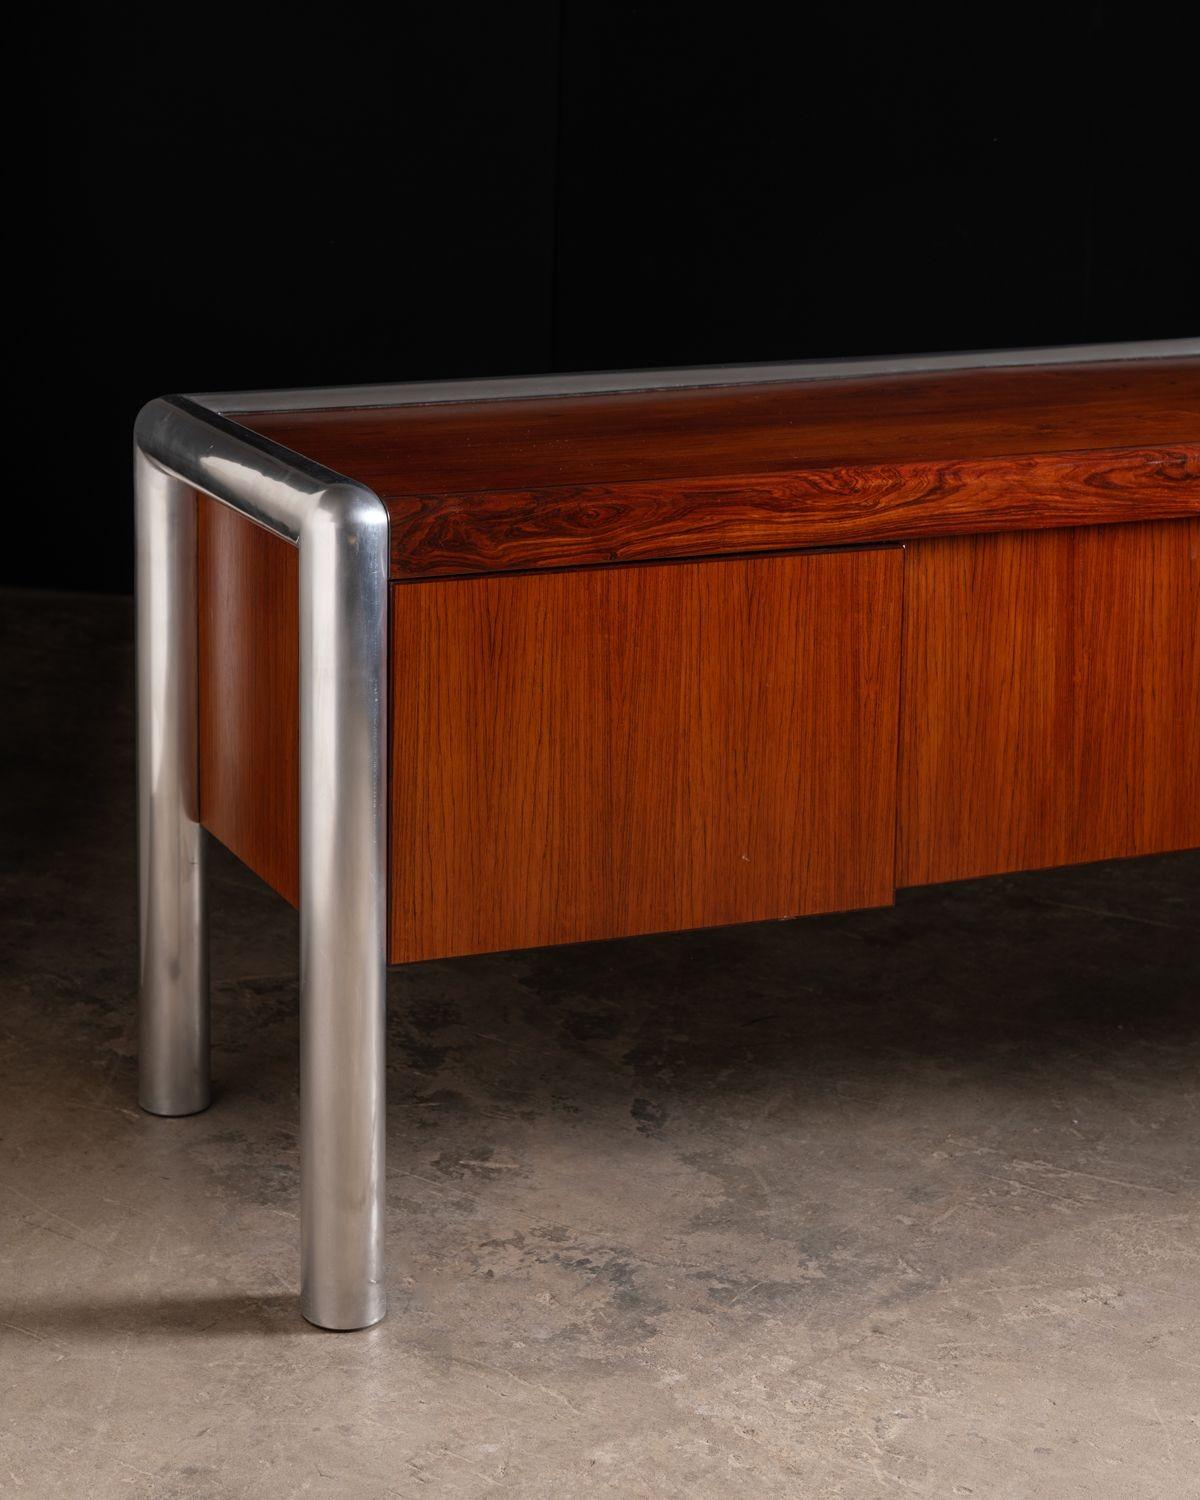 This is an exceptionally rare Brazilian Rosewood credenza designed by John Mascheroni for his TUBO series produced by Vecta Contract Furniture in the 1970s.
The satin-polished aluminum tubular frame is highly complementary to the bookmatched